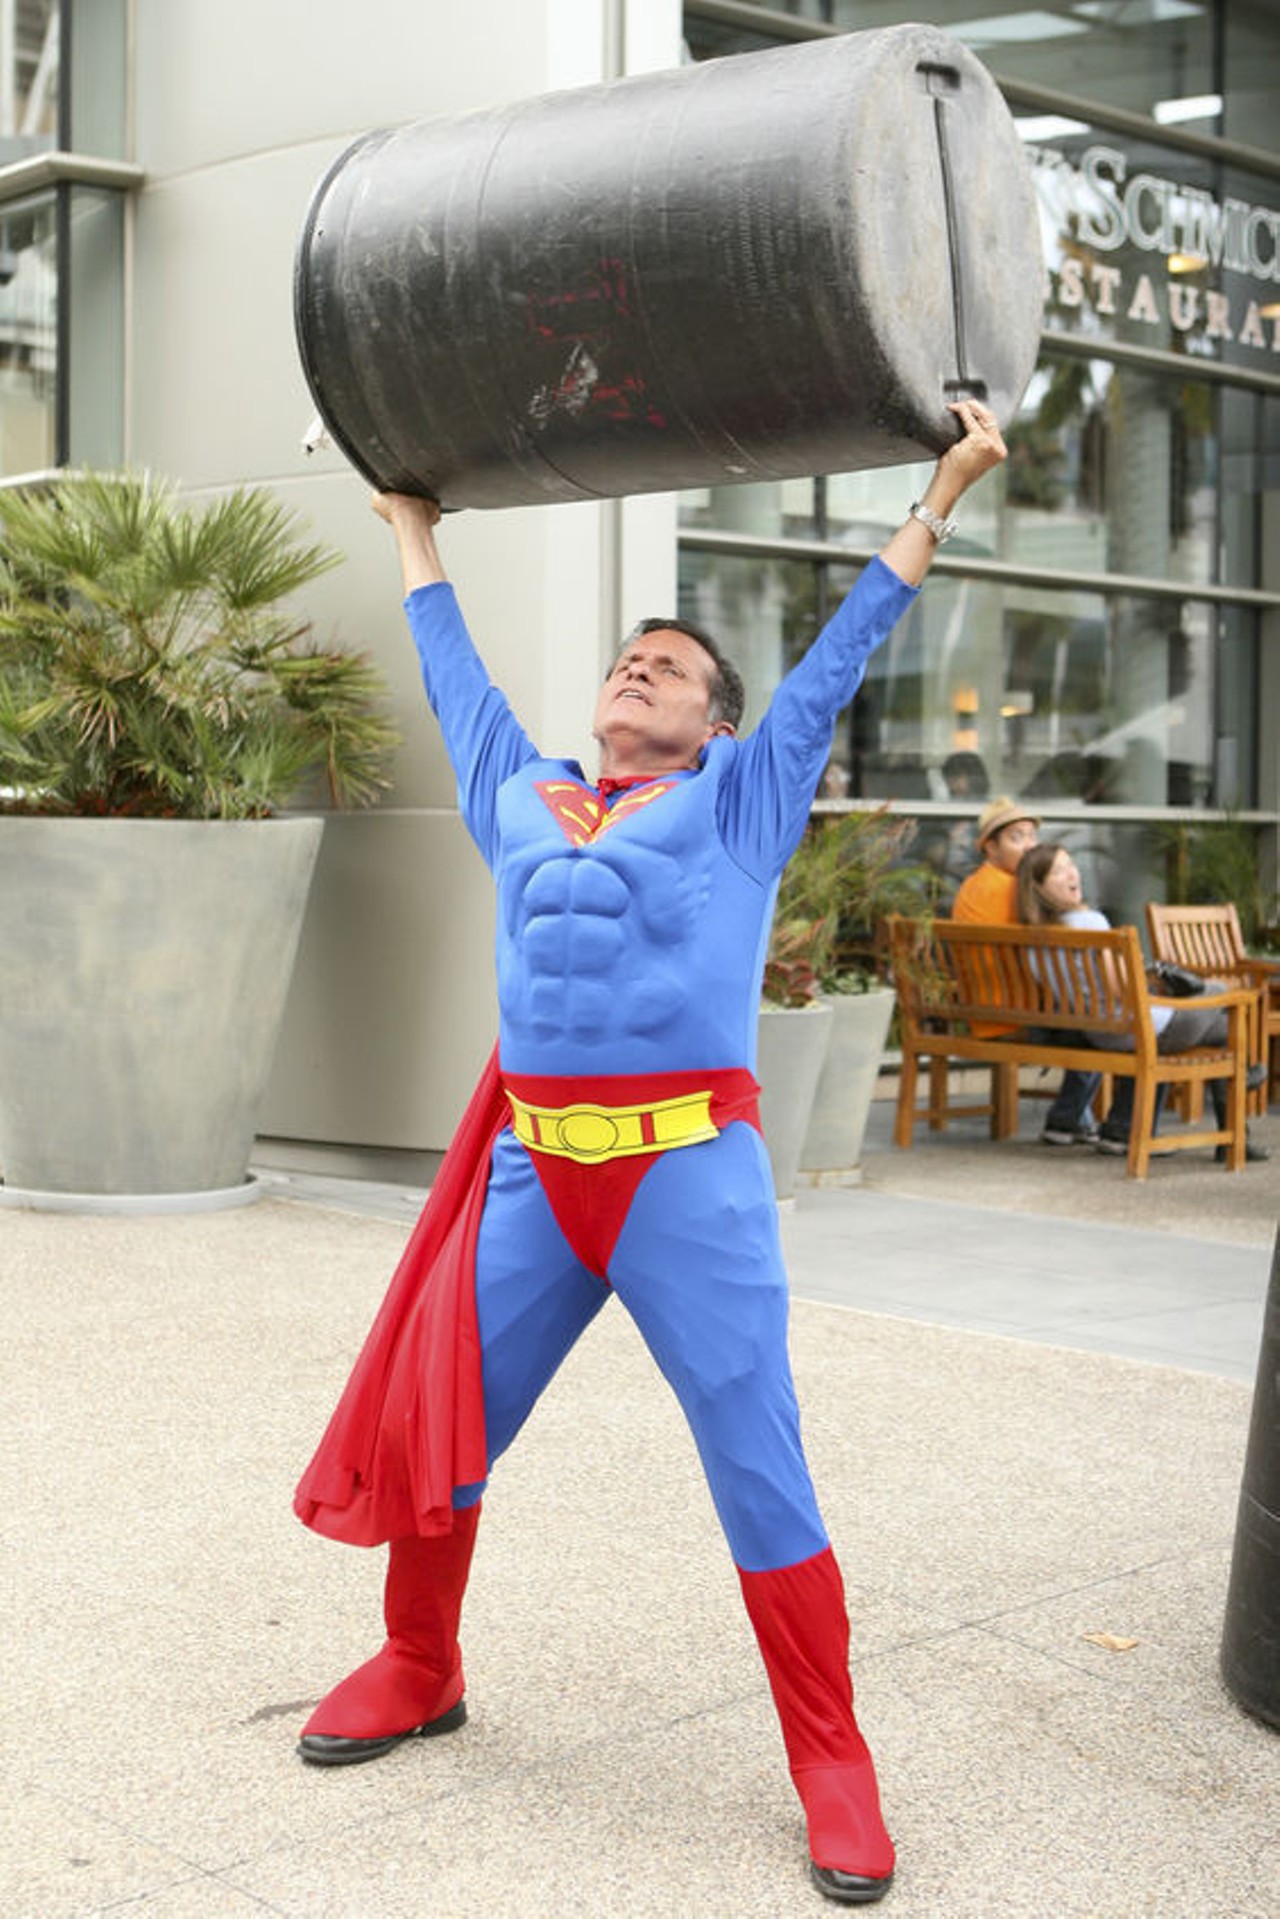 One of the best examples of in-action Superman cosplay we saw this year. Lift that barrel!